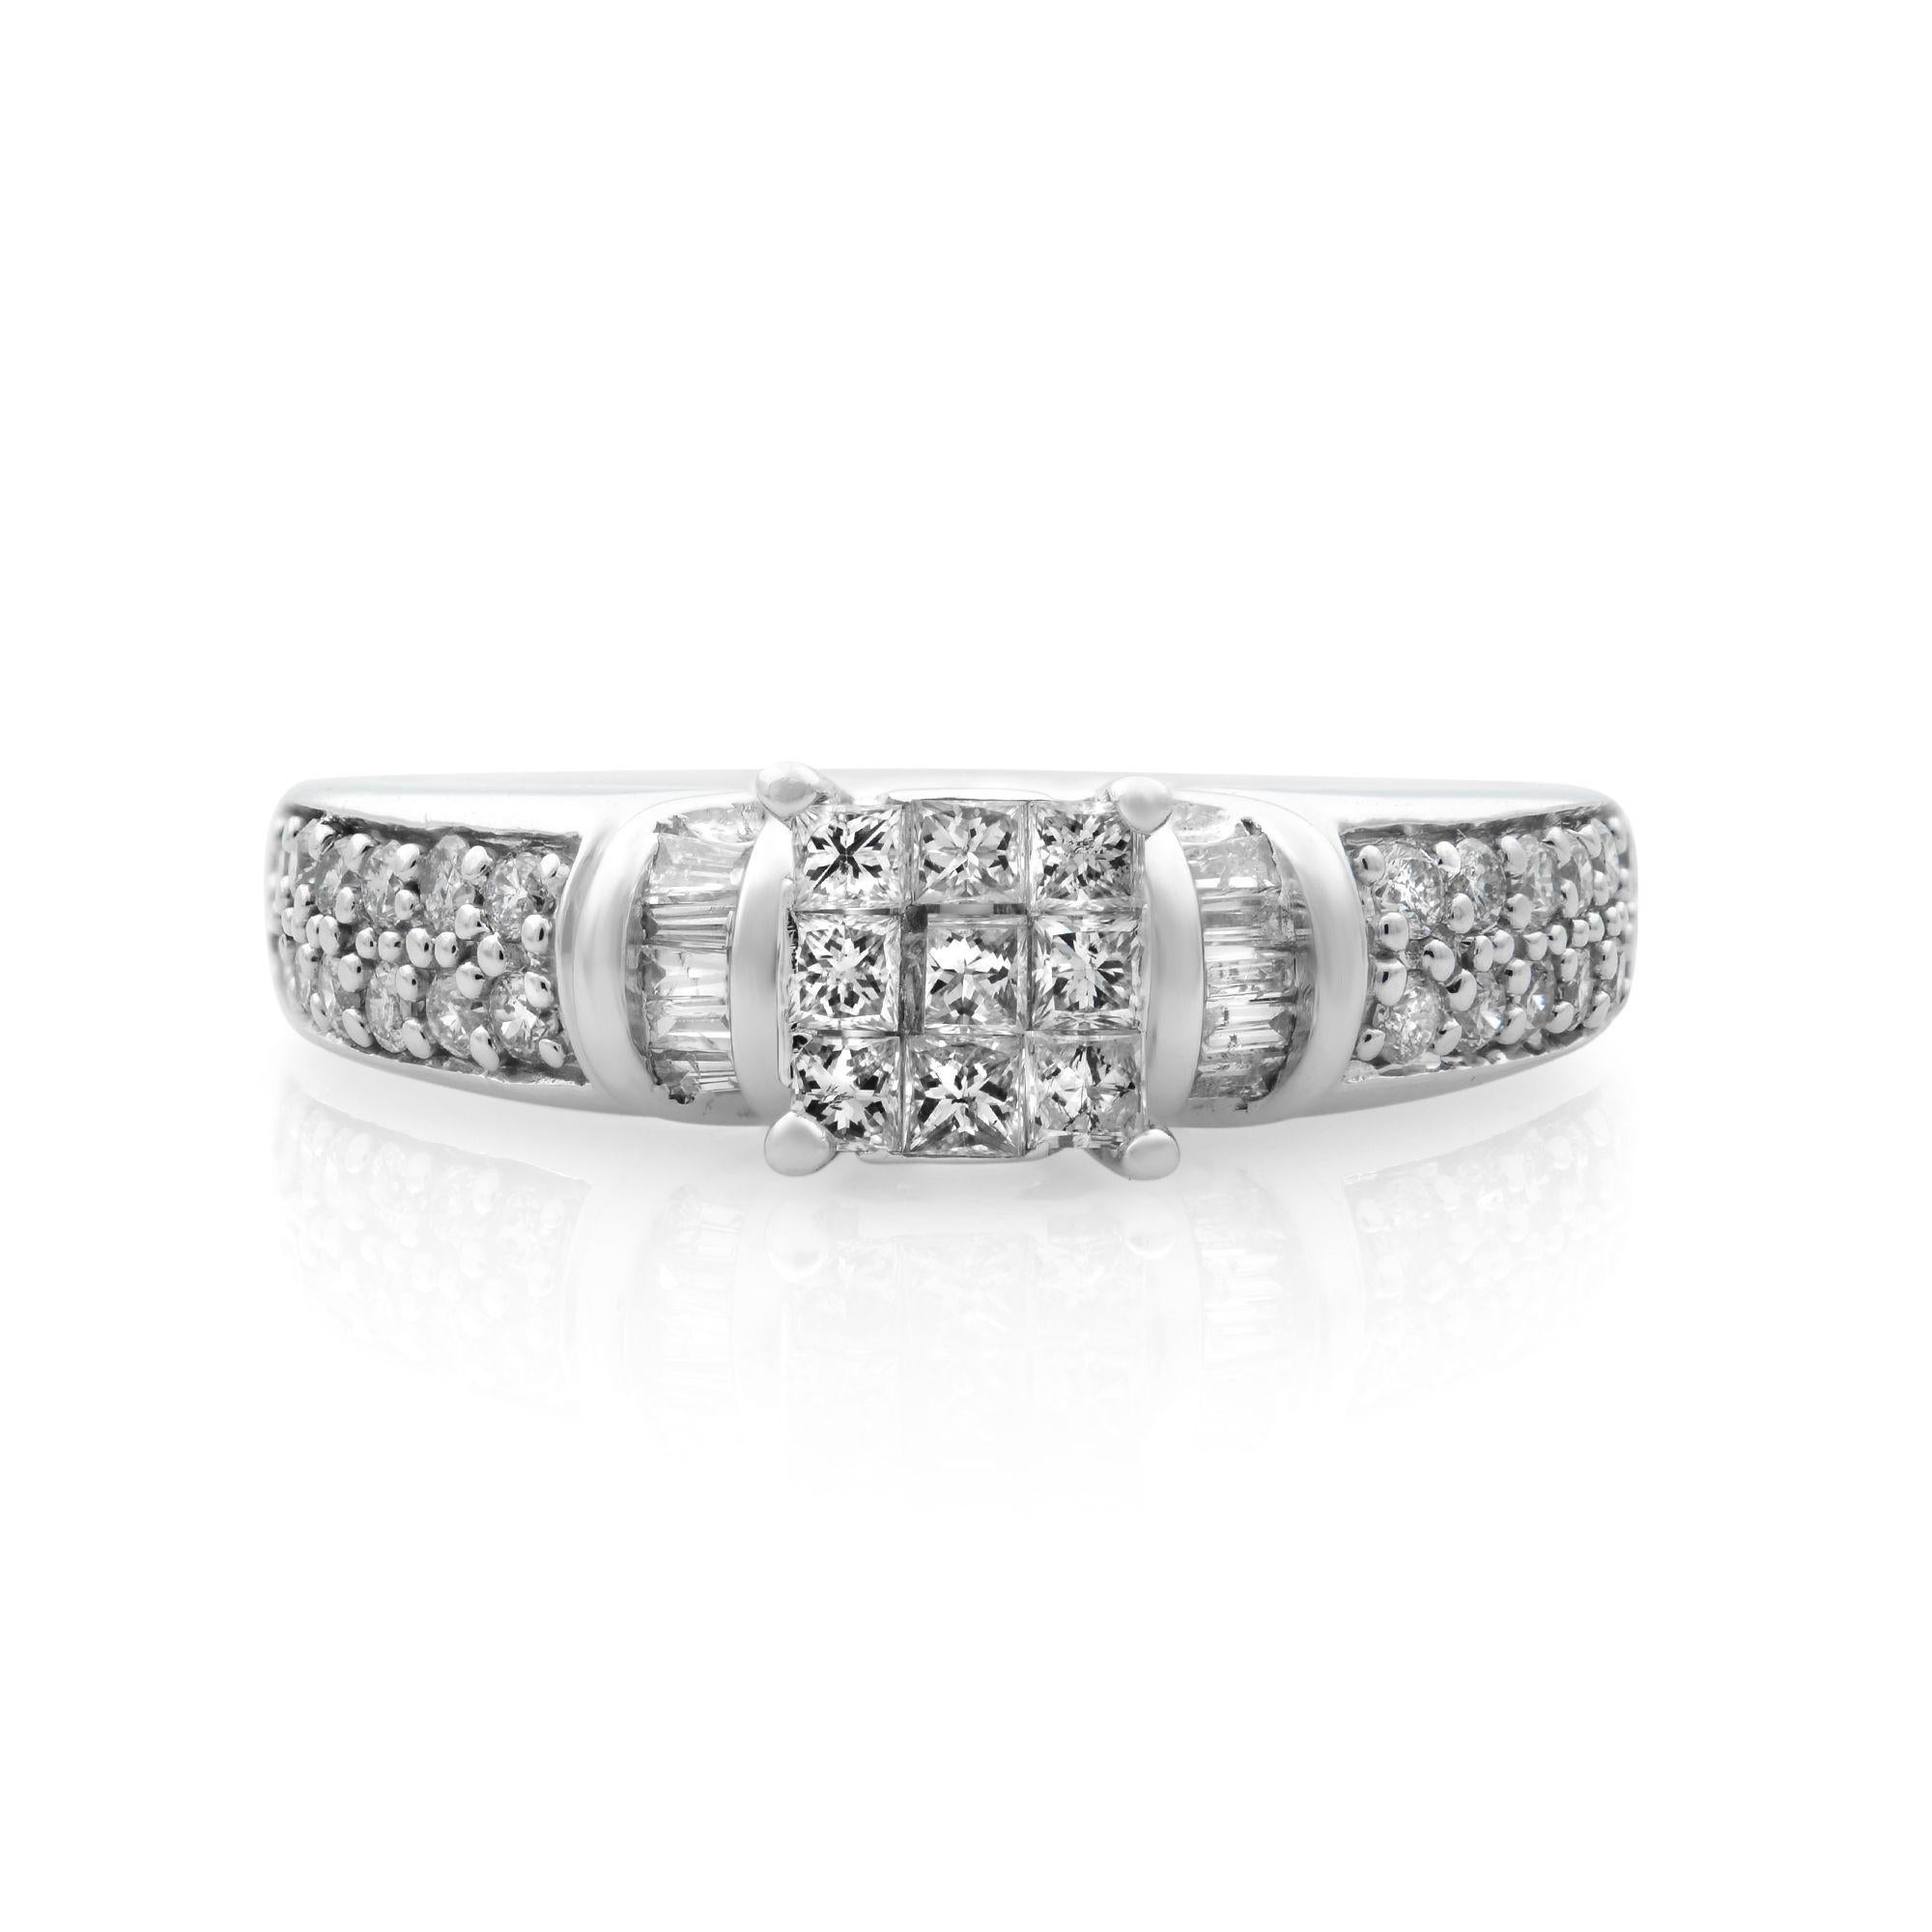 Honor her with this exceptional diamond engagement ring crafted in 14K white gold. This ring features a square-shaped frame, set with 9 princess cut diamonds as a center stone and diamond baguettes on each side. Smaller round accent diamonds are